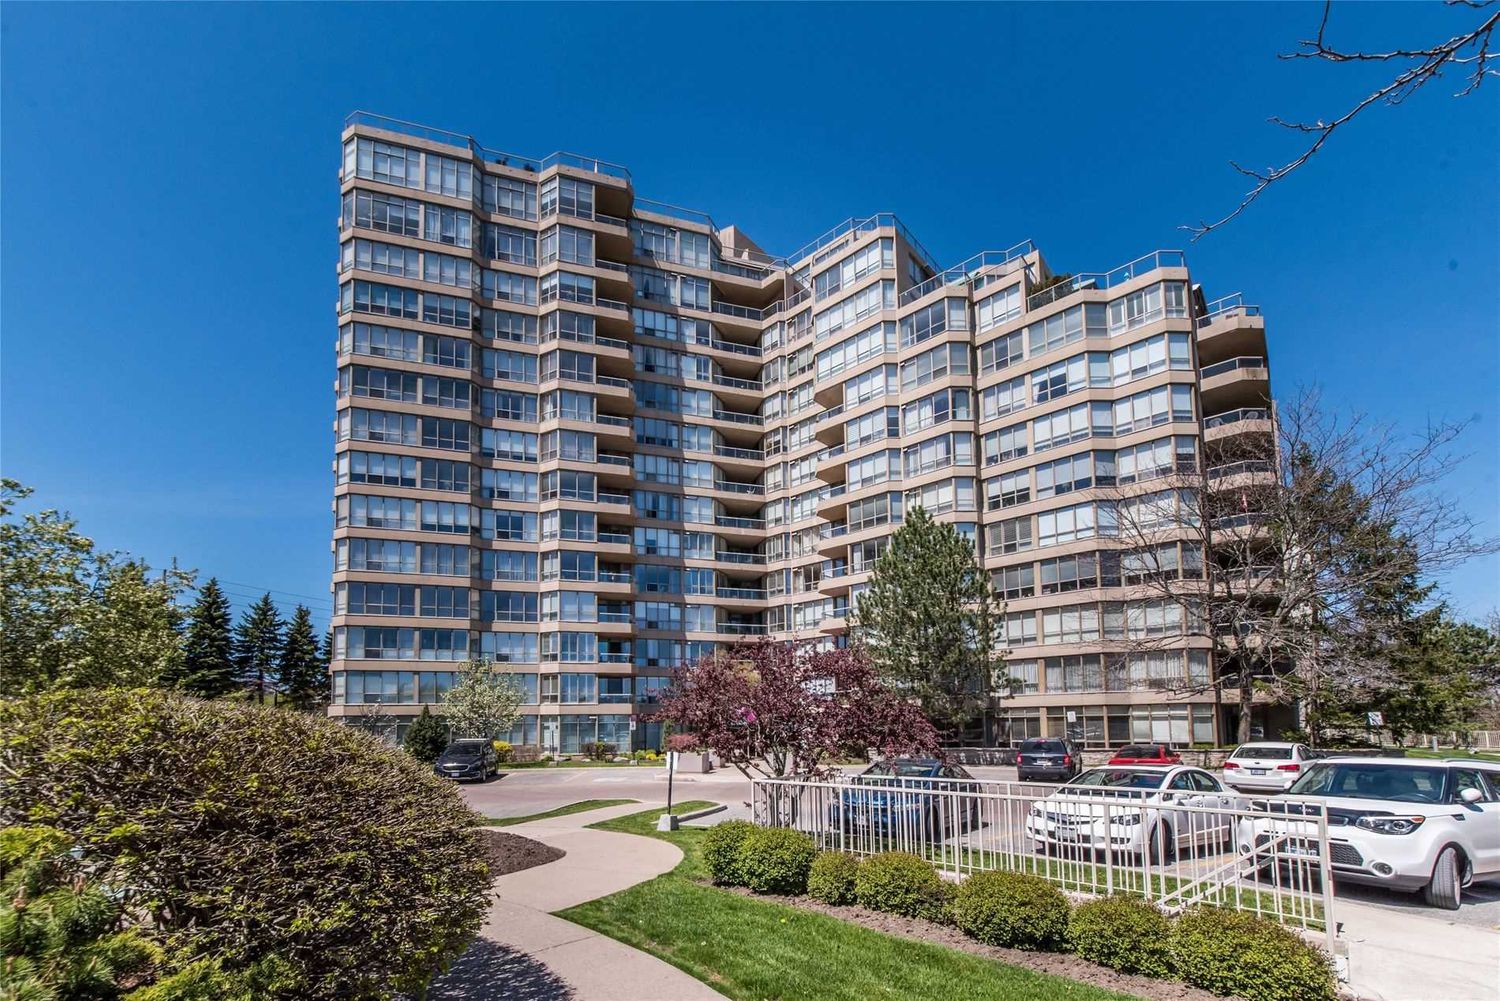 20 Guildwood Parkway. Gates of Guildwood Condos is located in  Scarborough, Toronto - image #1 of 2